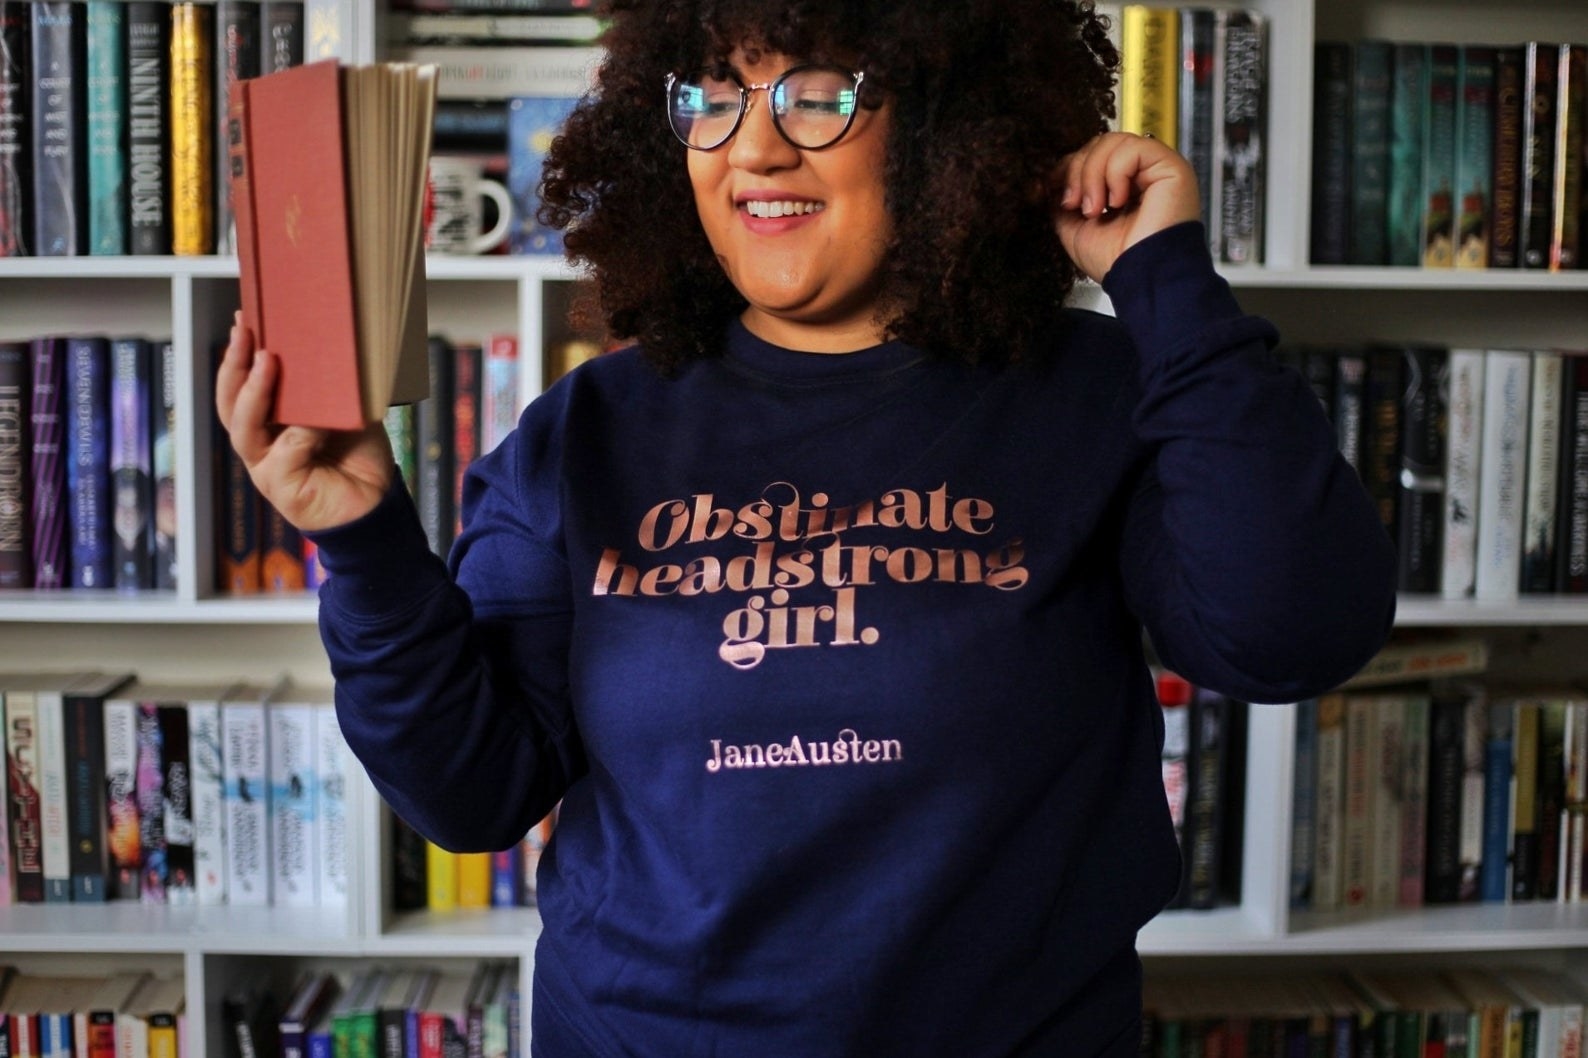 model wearing the navy blue sweatshirt with rose gold text.